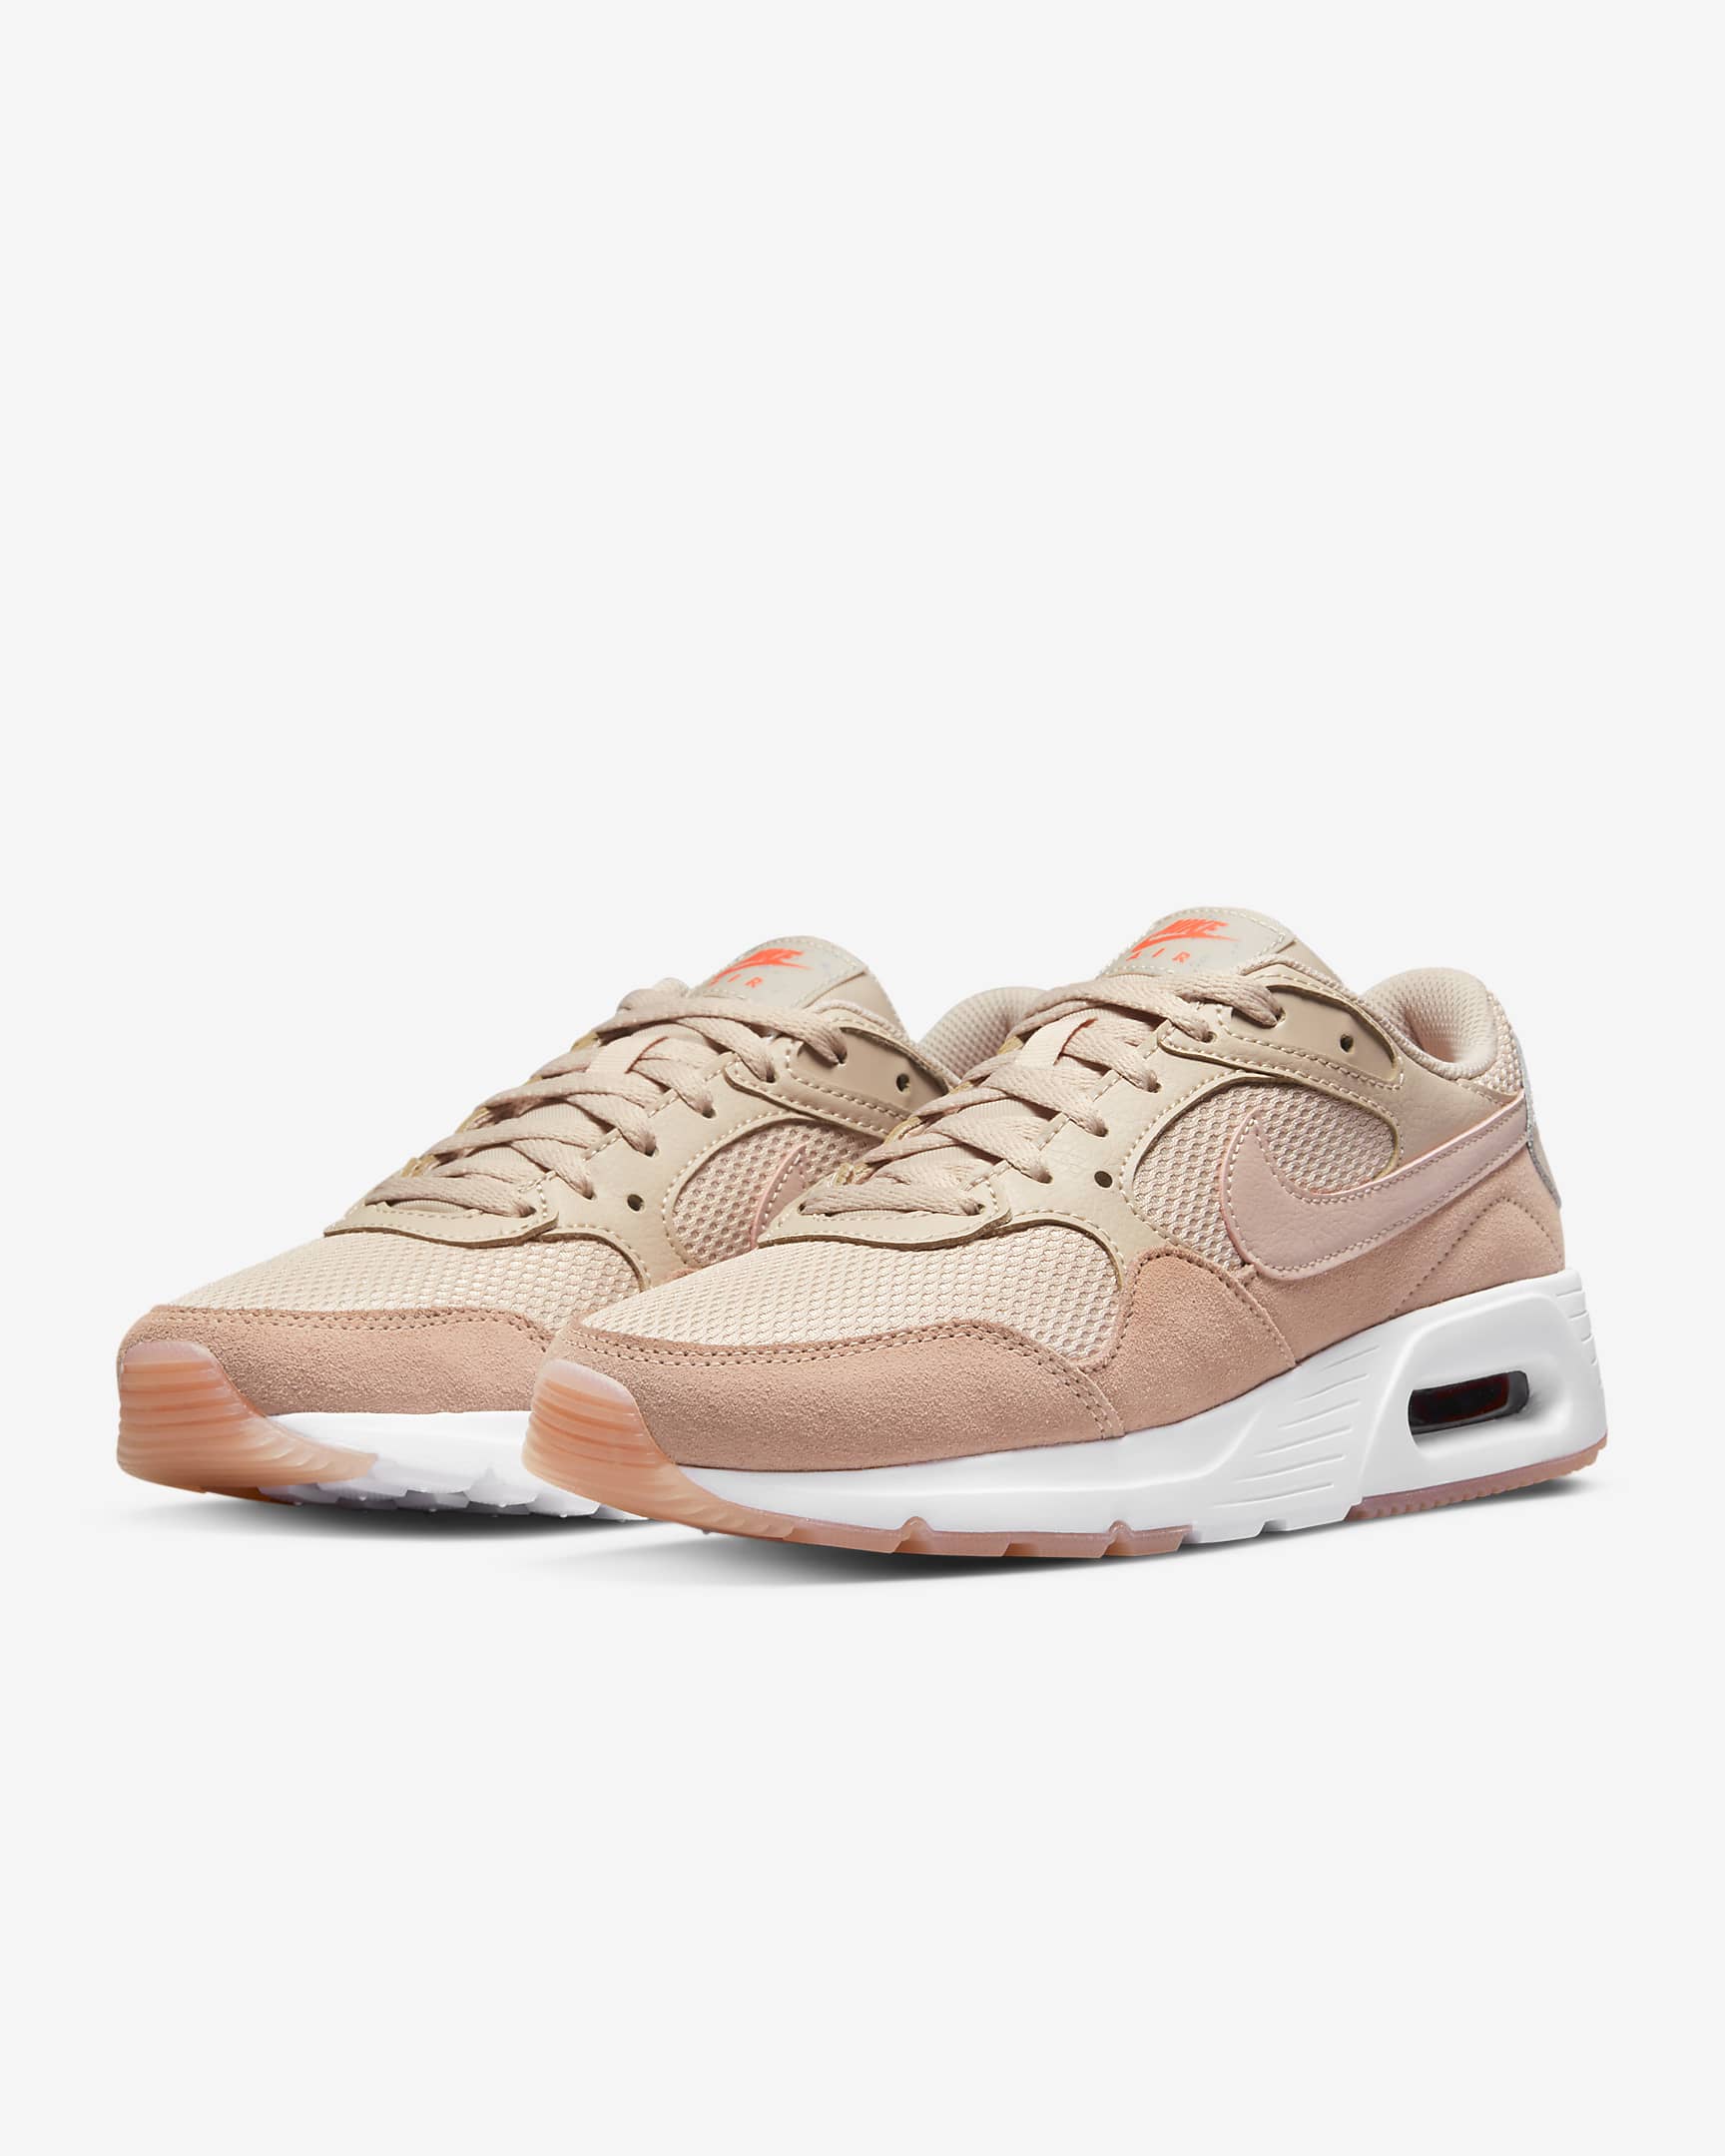 Nike Air Max SC Women's Shoes - Fossil Stone/Rose Whisper/White/Pink Oxford